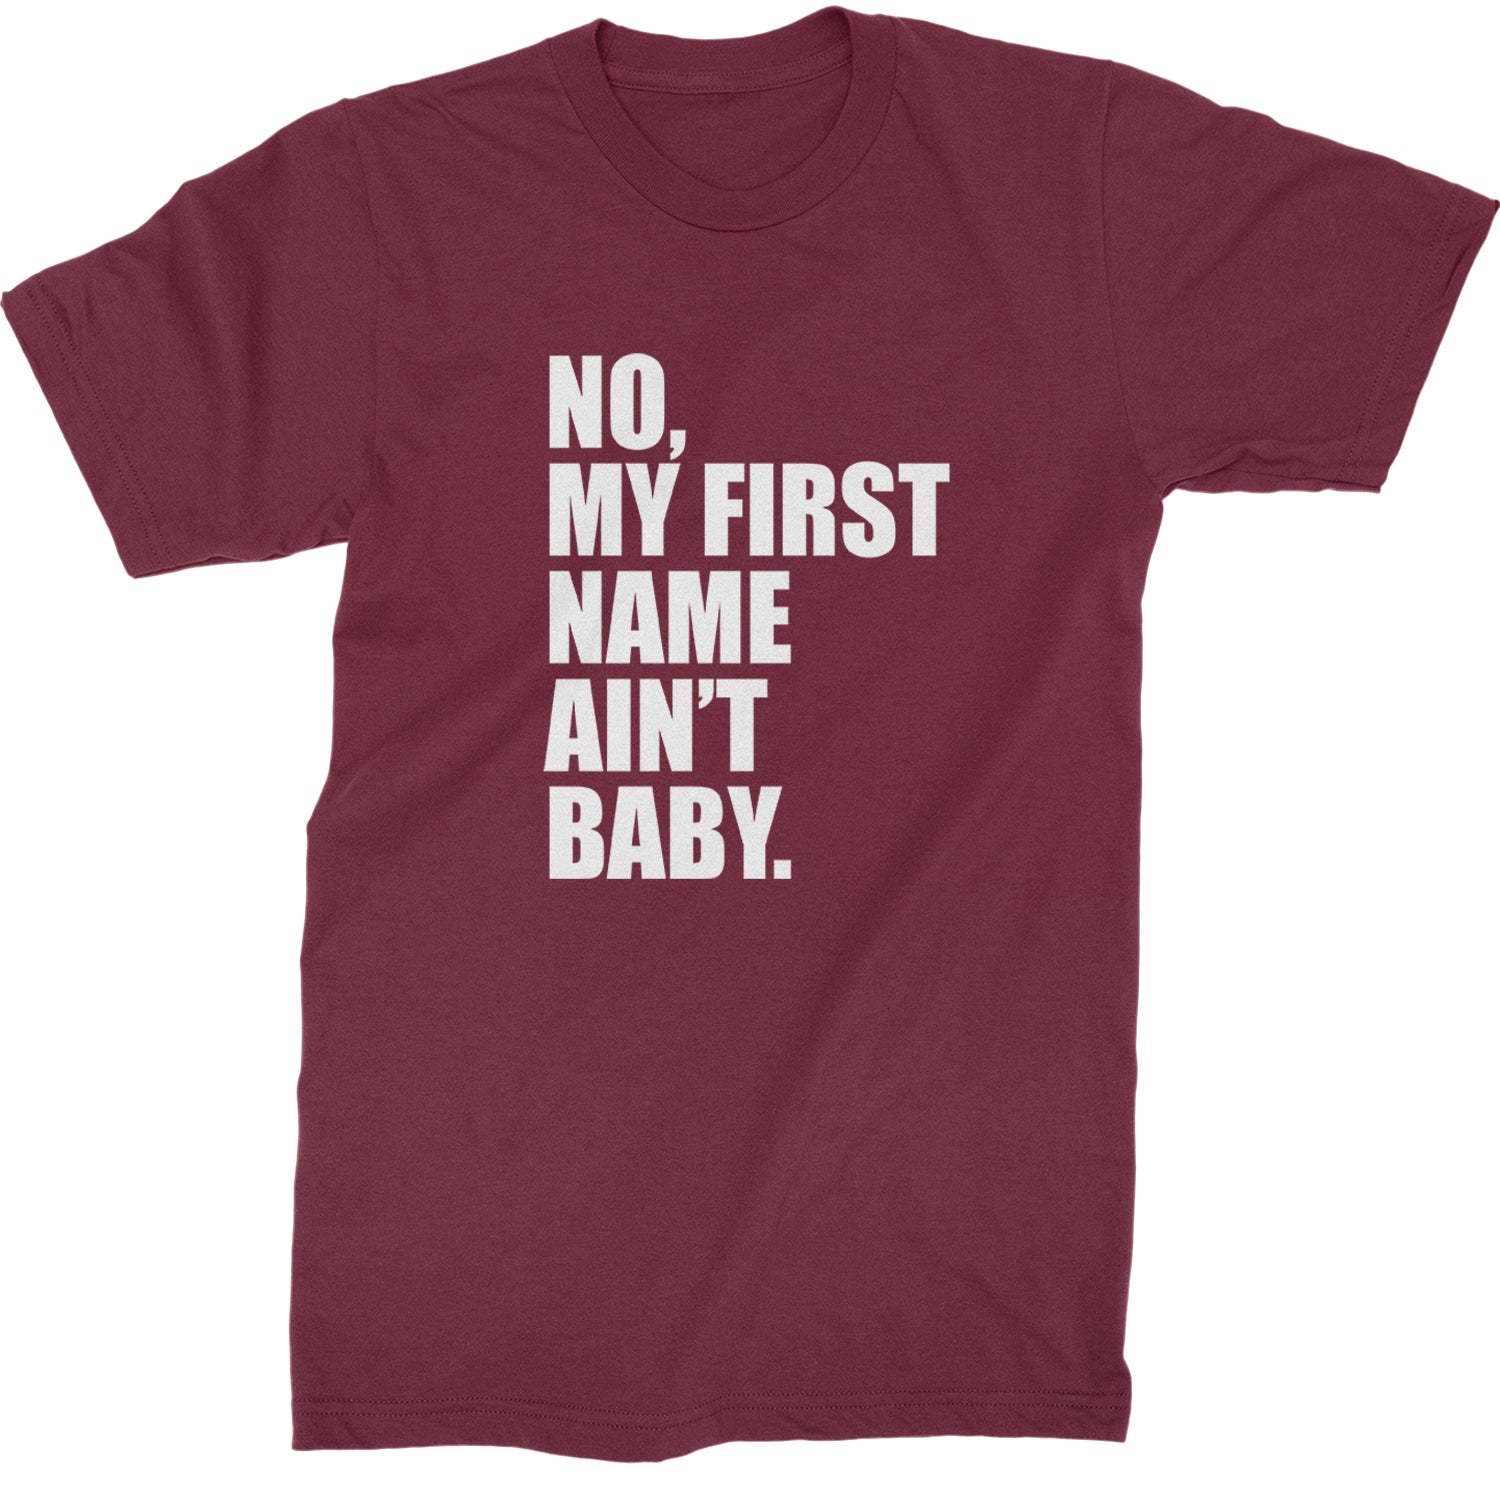 No My First Name Ain't Baby Together Again Mens T-shirt Maroon